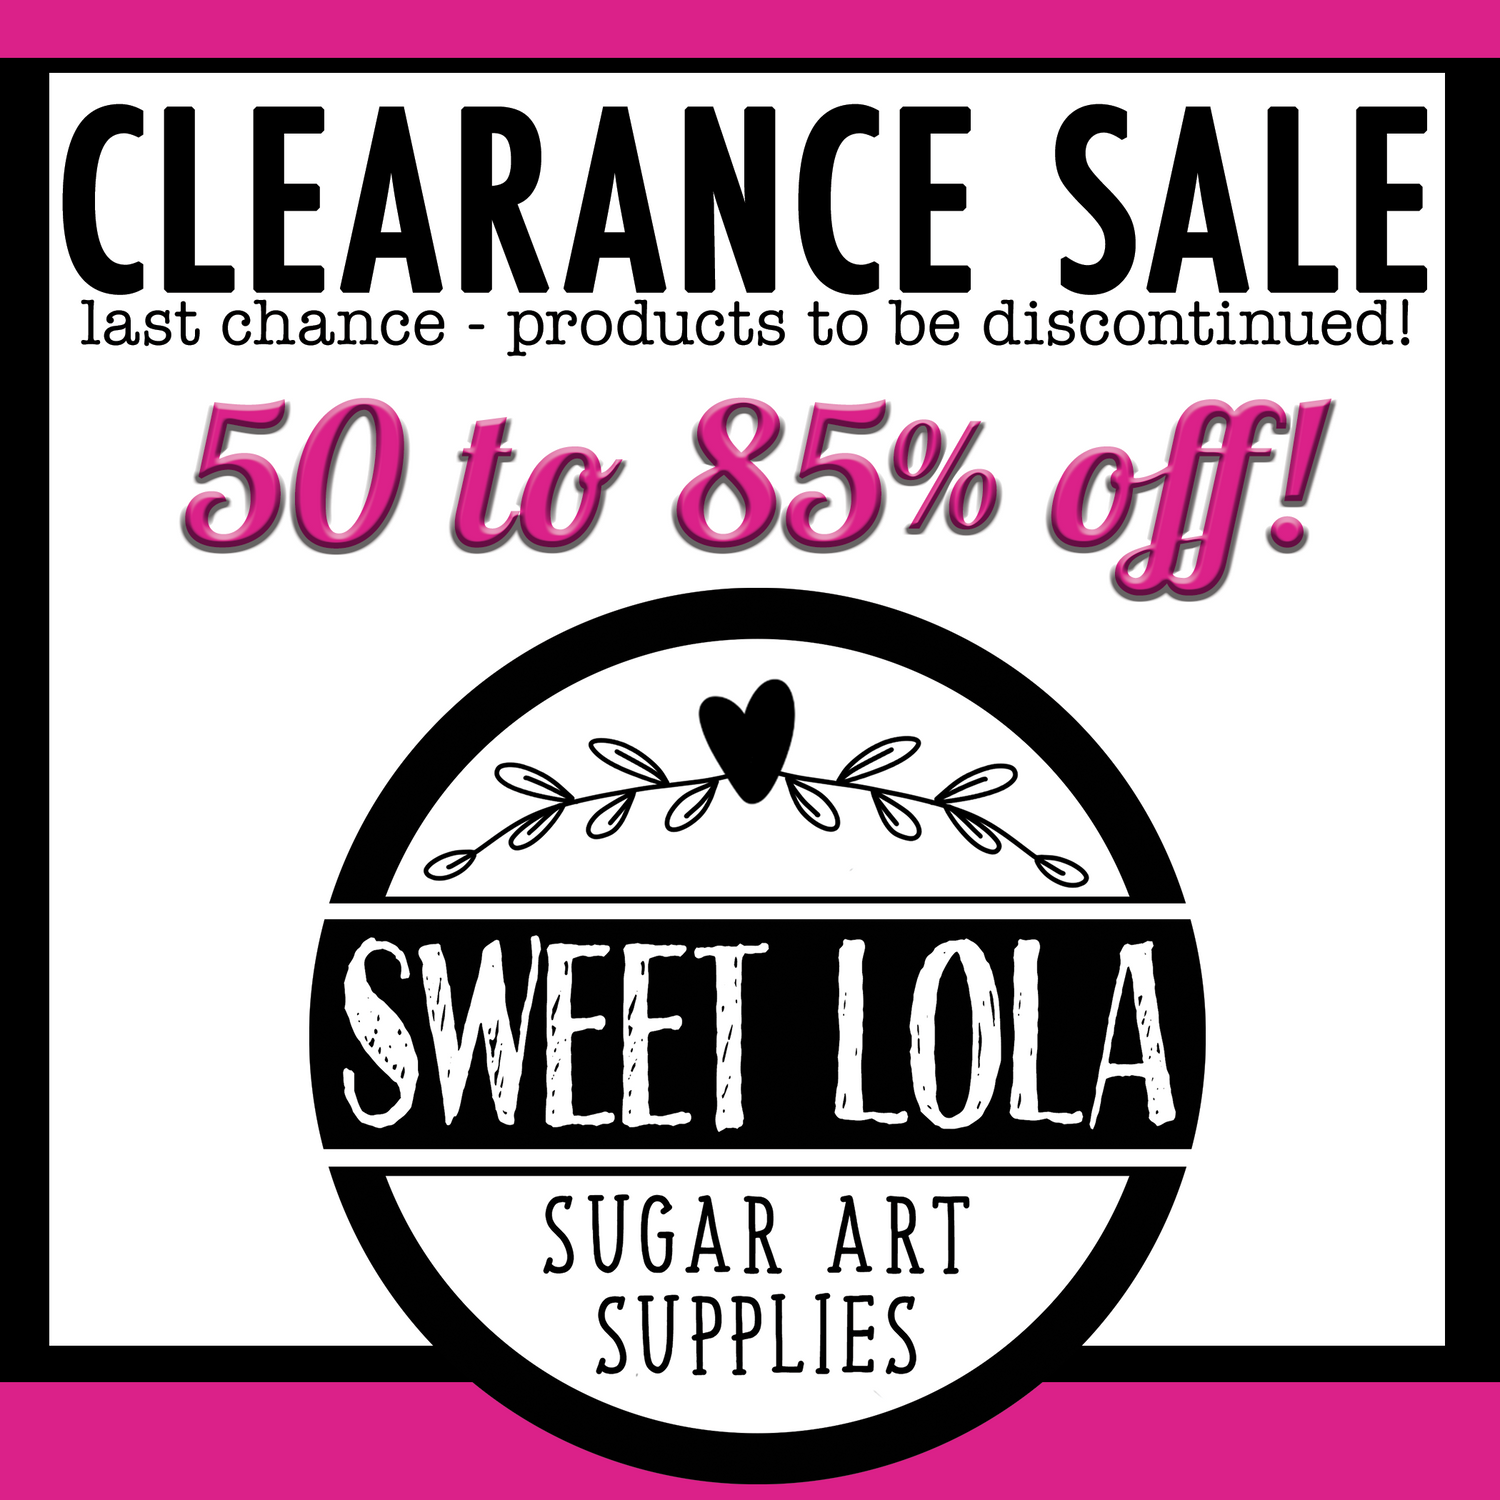 CLEARANCE - LAST CHANCE!